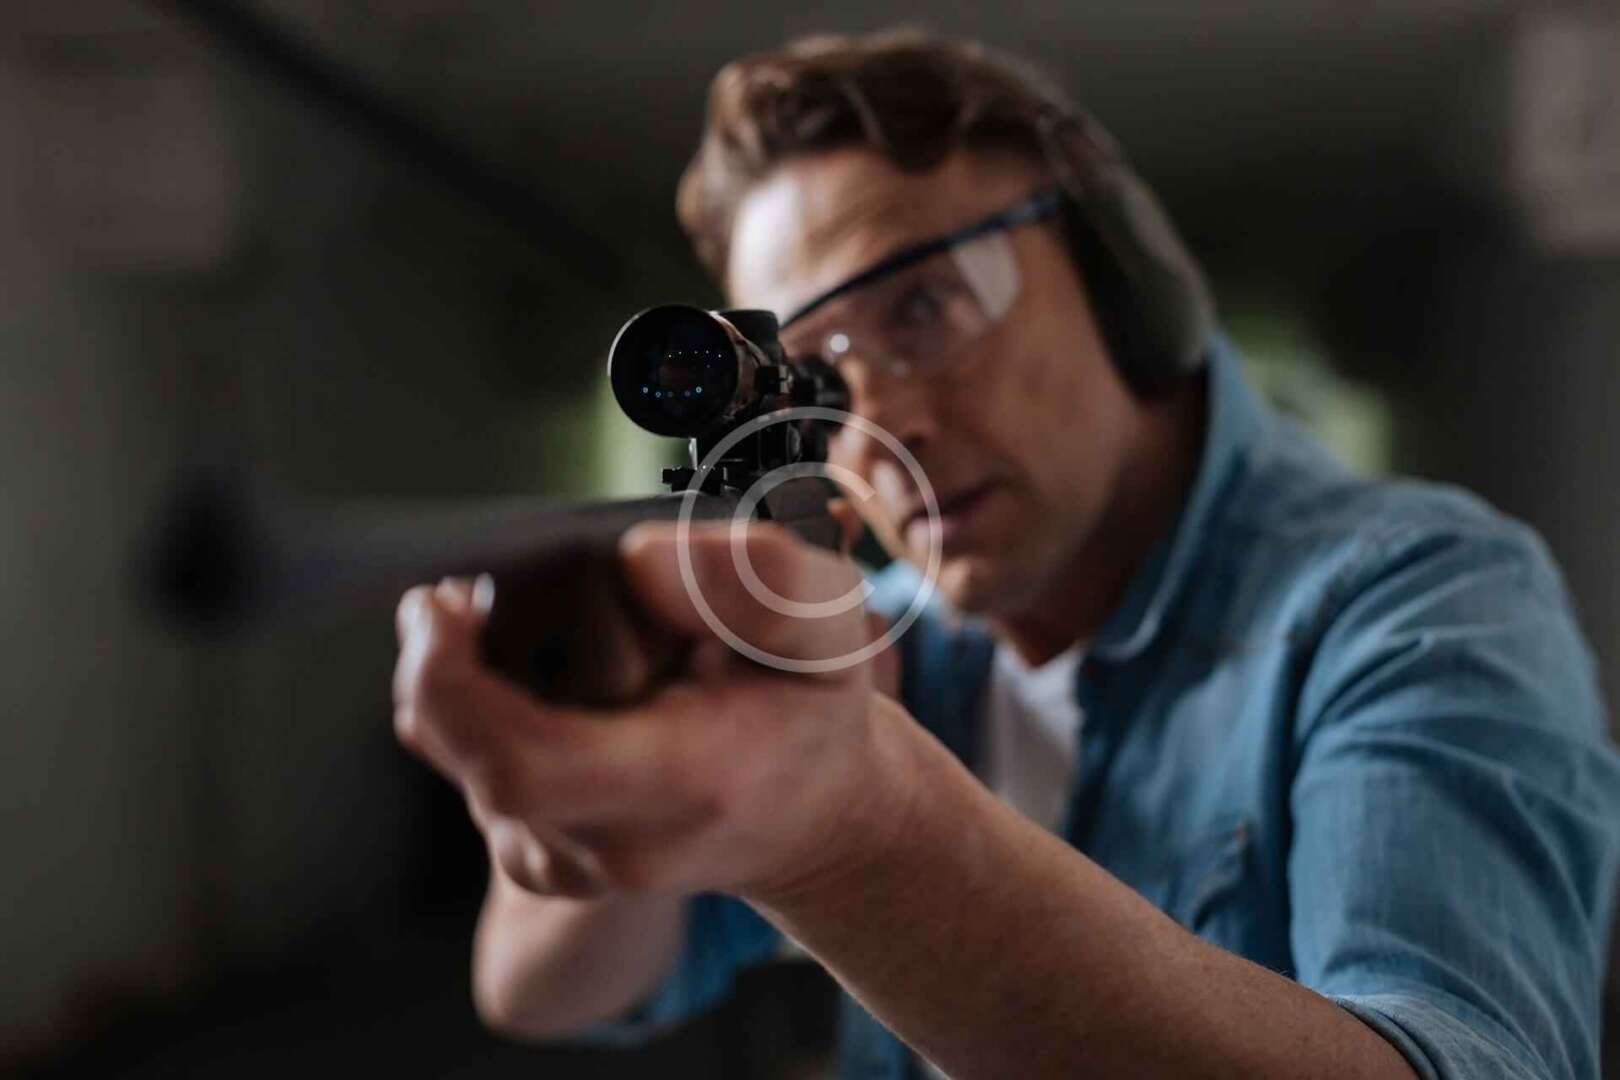 A man aiming at a rifle in a shooting range.